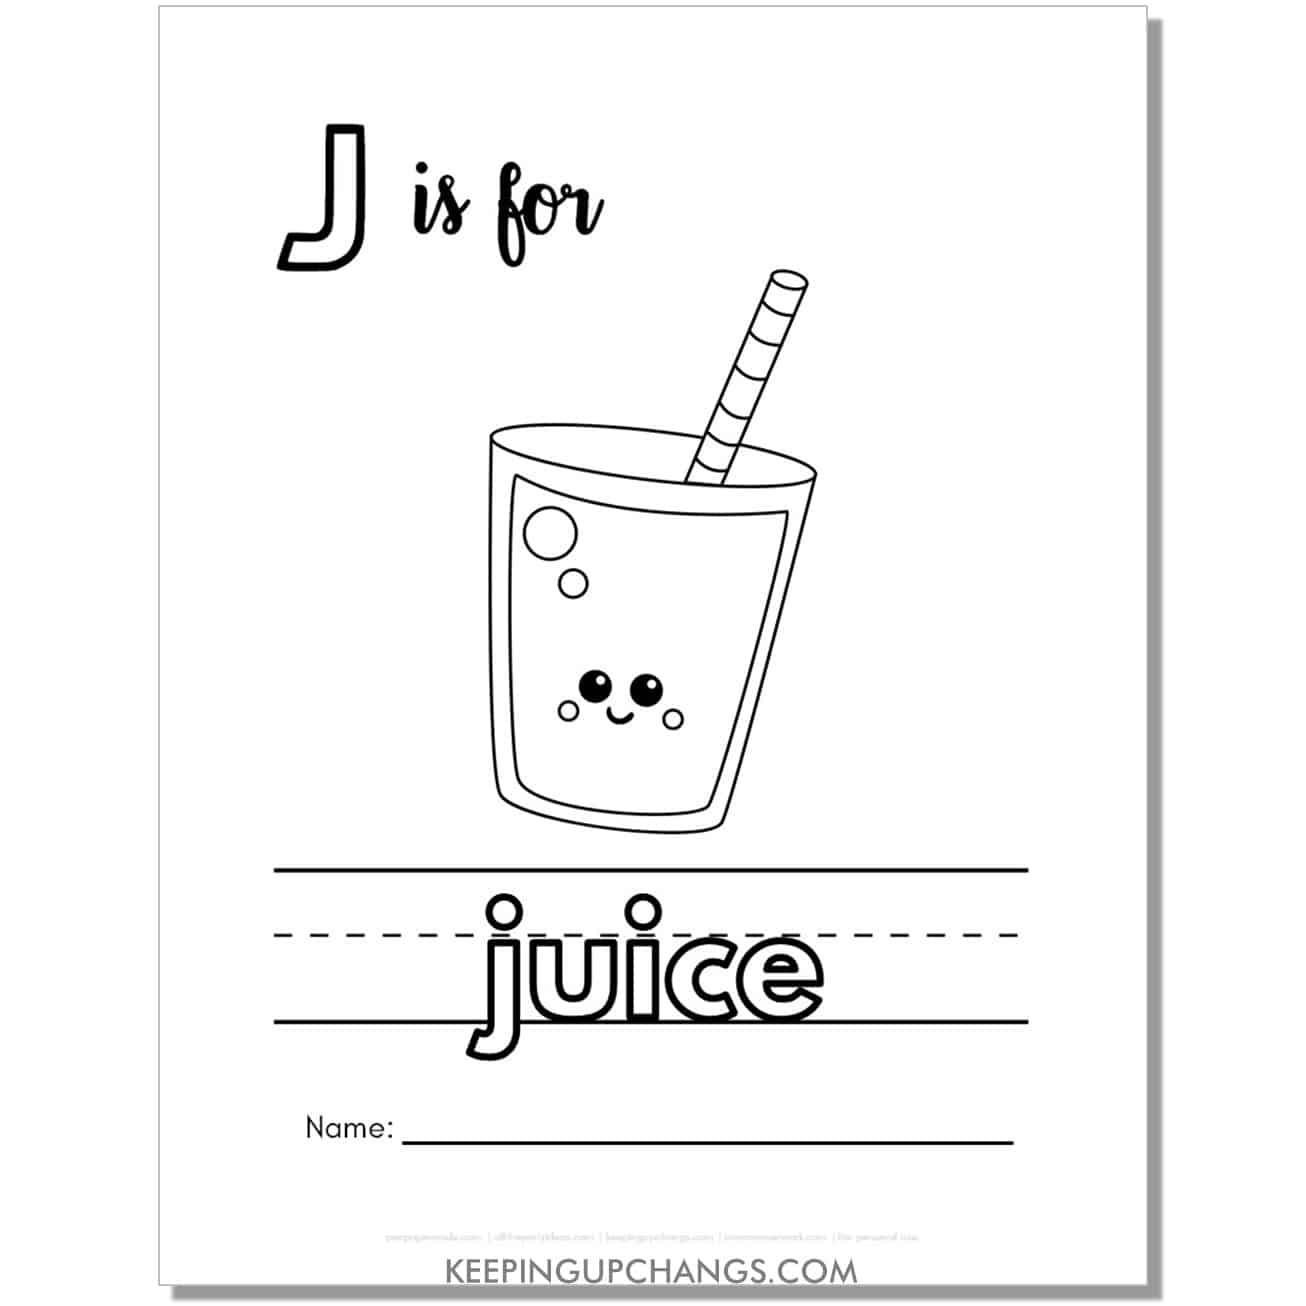 cute letter j coloring page worksheet with juice.